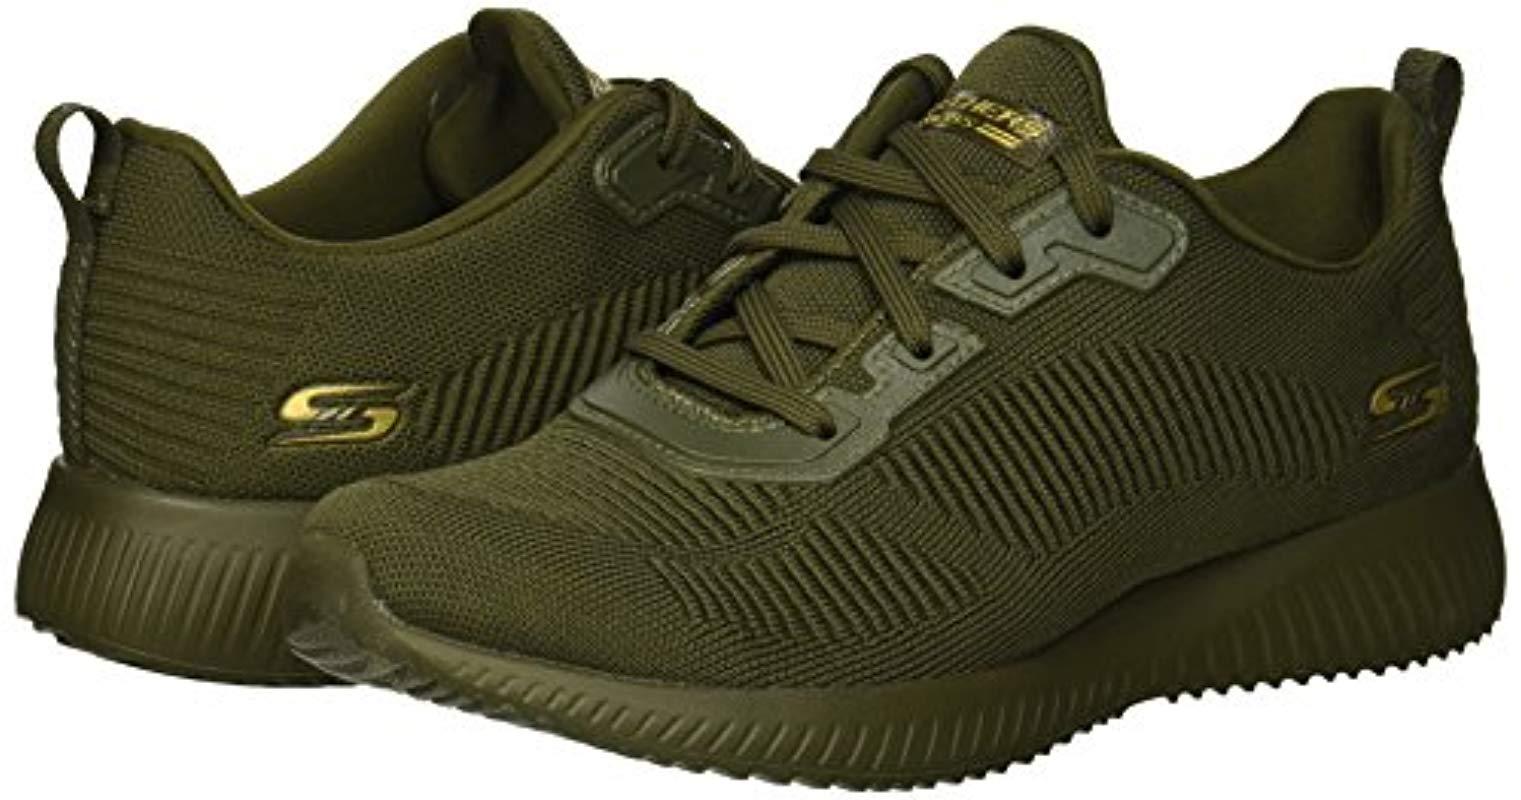 Skechers Rubber Tough Talk Trainers - Grey - Uk in Olive (Gray) - Save 44%  | Lyst